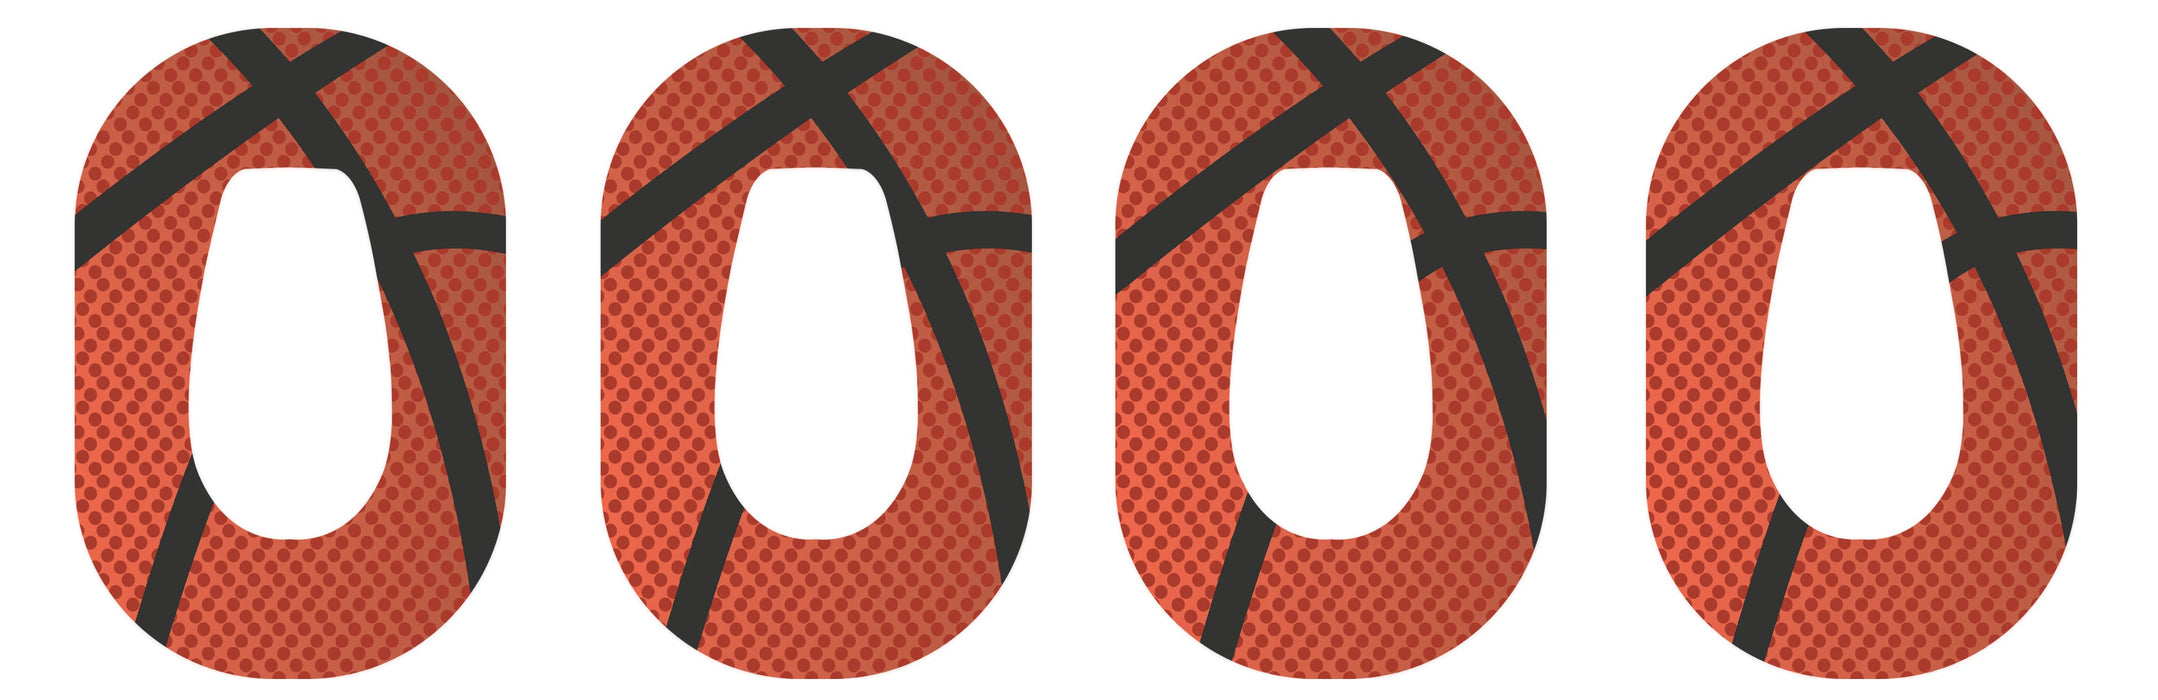 Basketball For Patch+ Dexcom G6 Tape 4-Pack